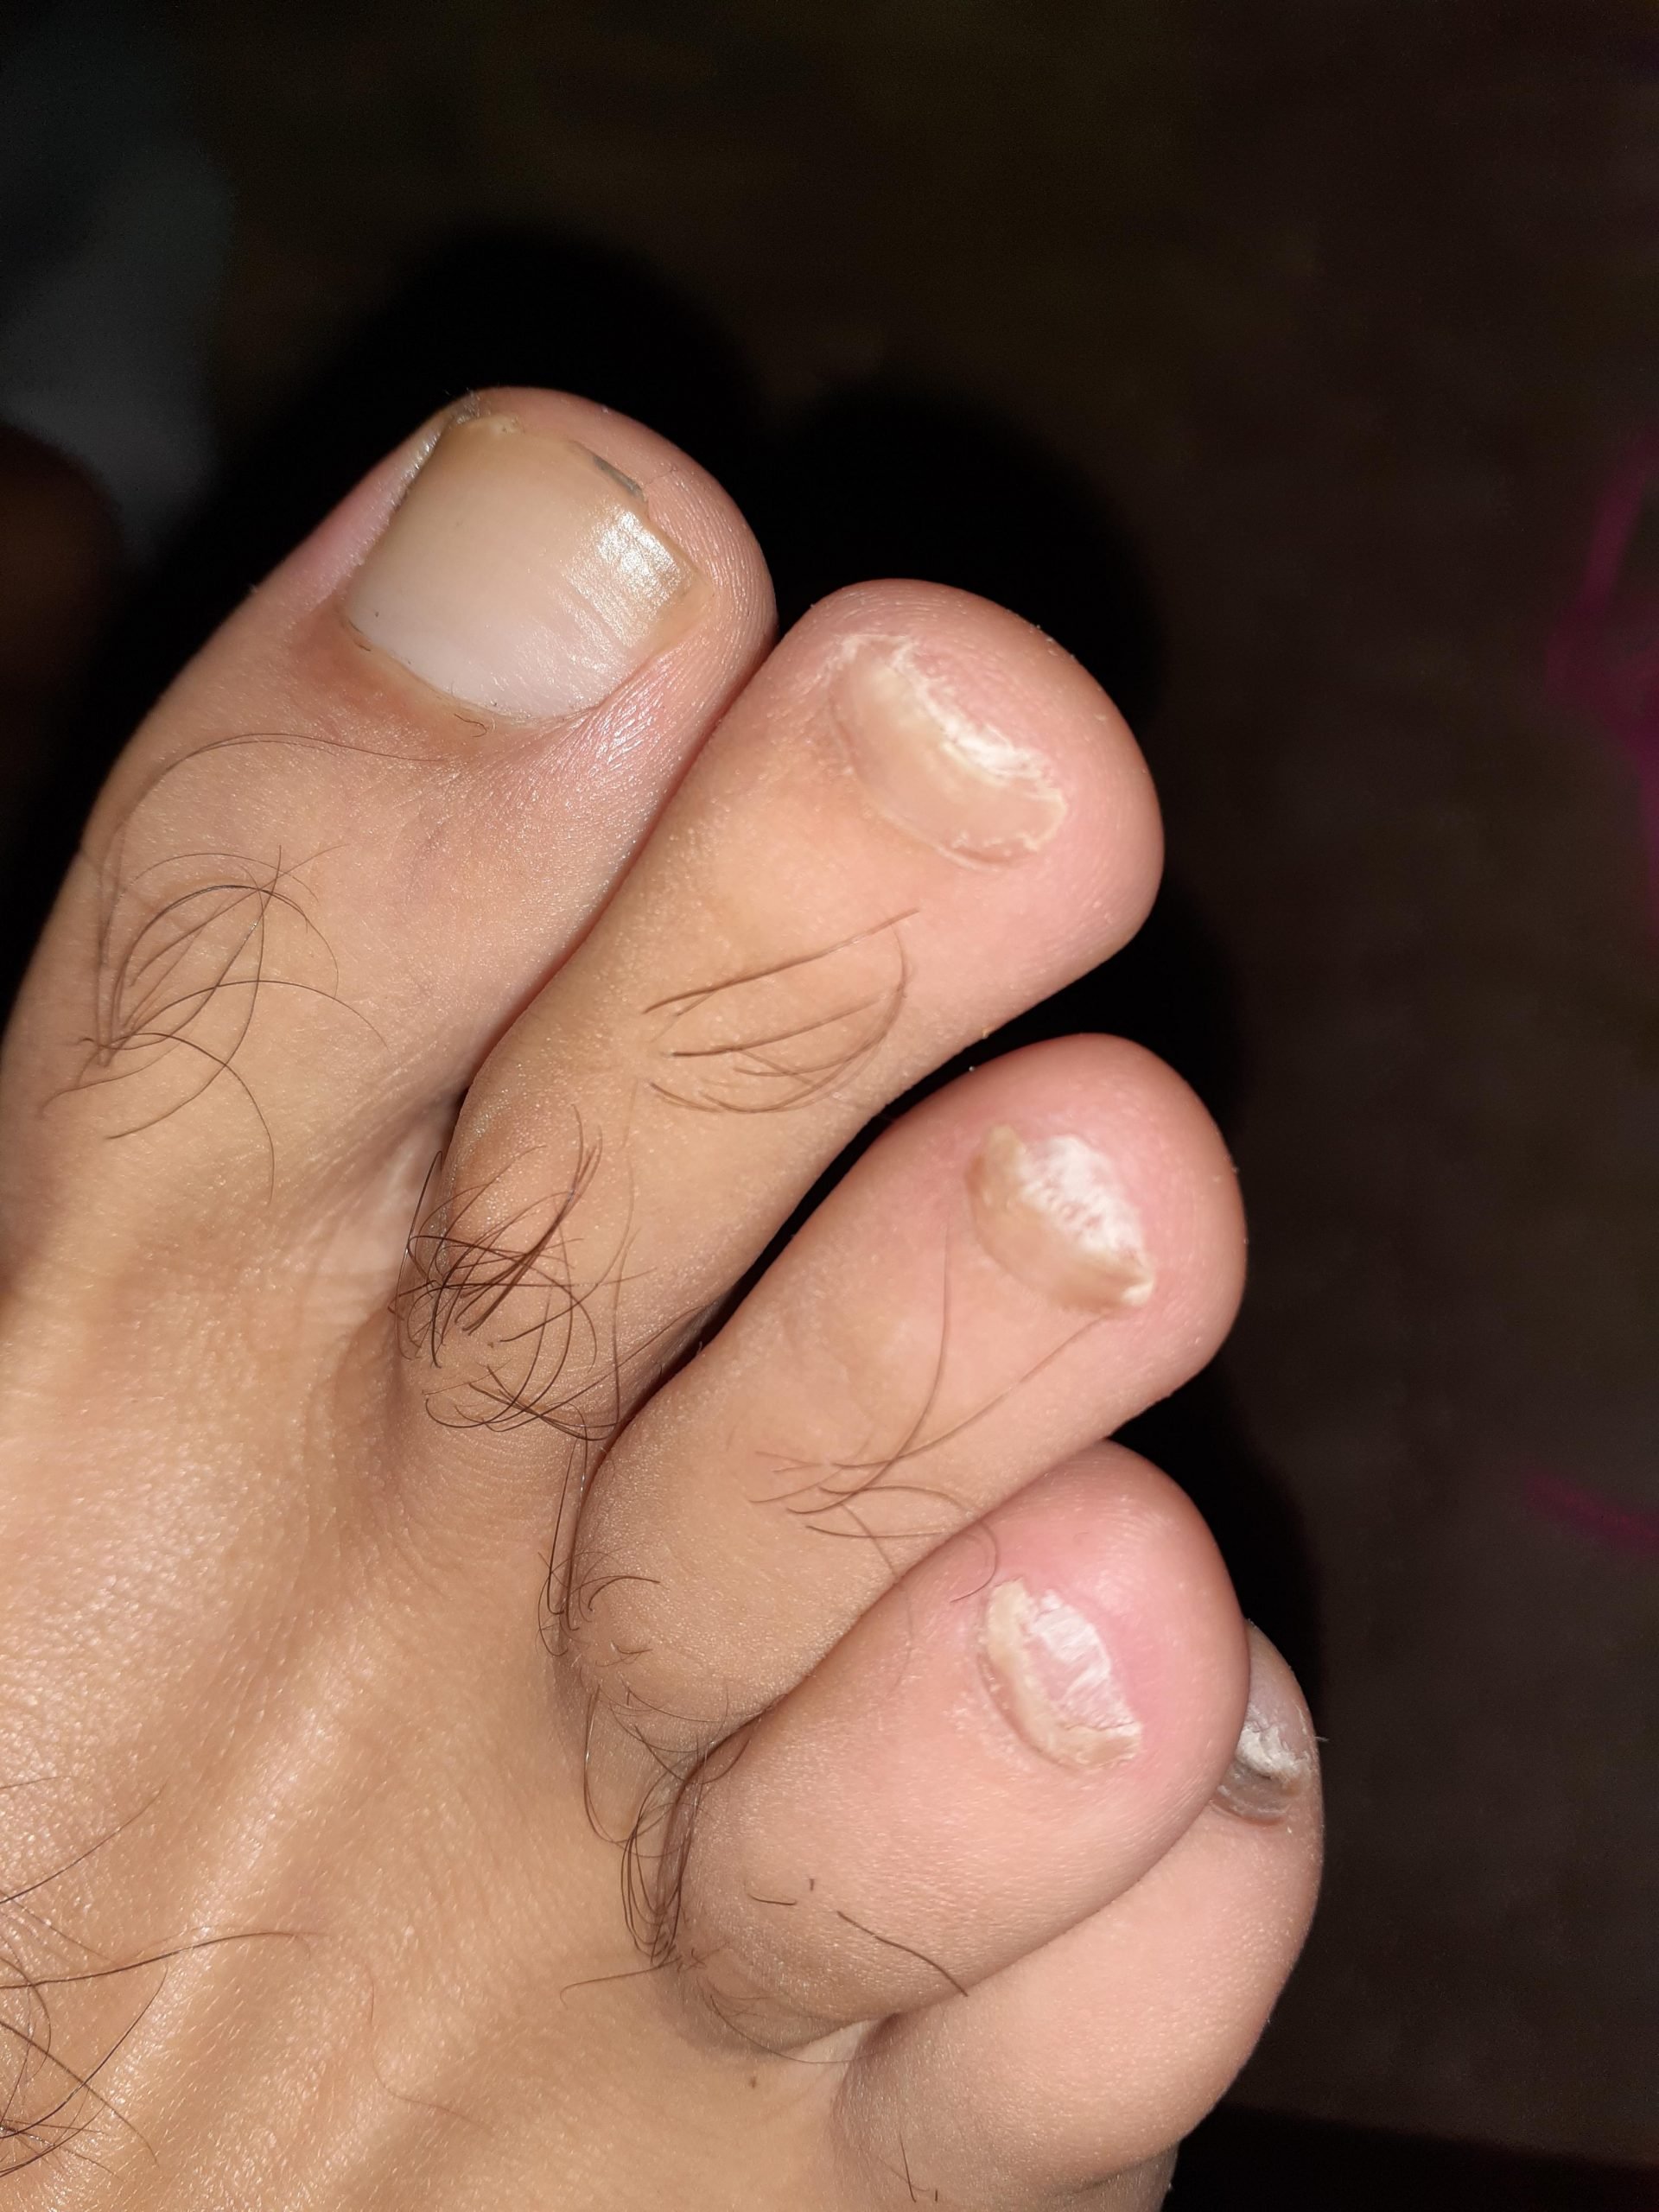 So once we remove the effected toenails....how do i keep fungus from ...